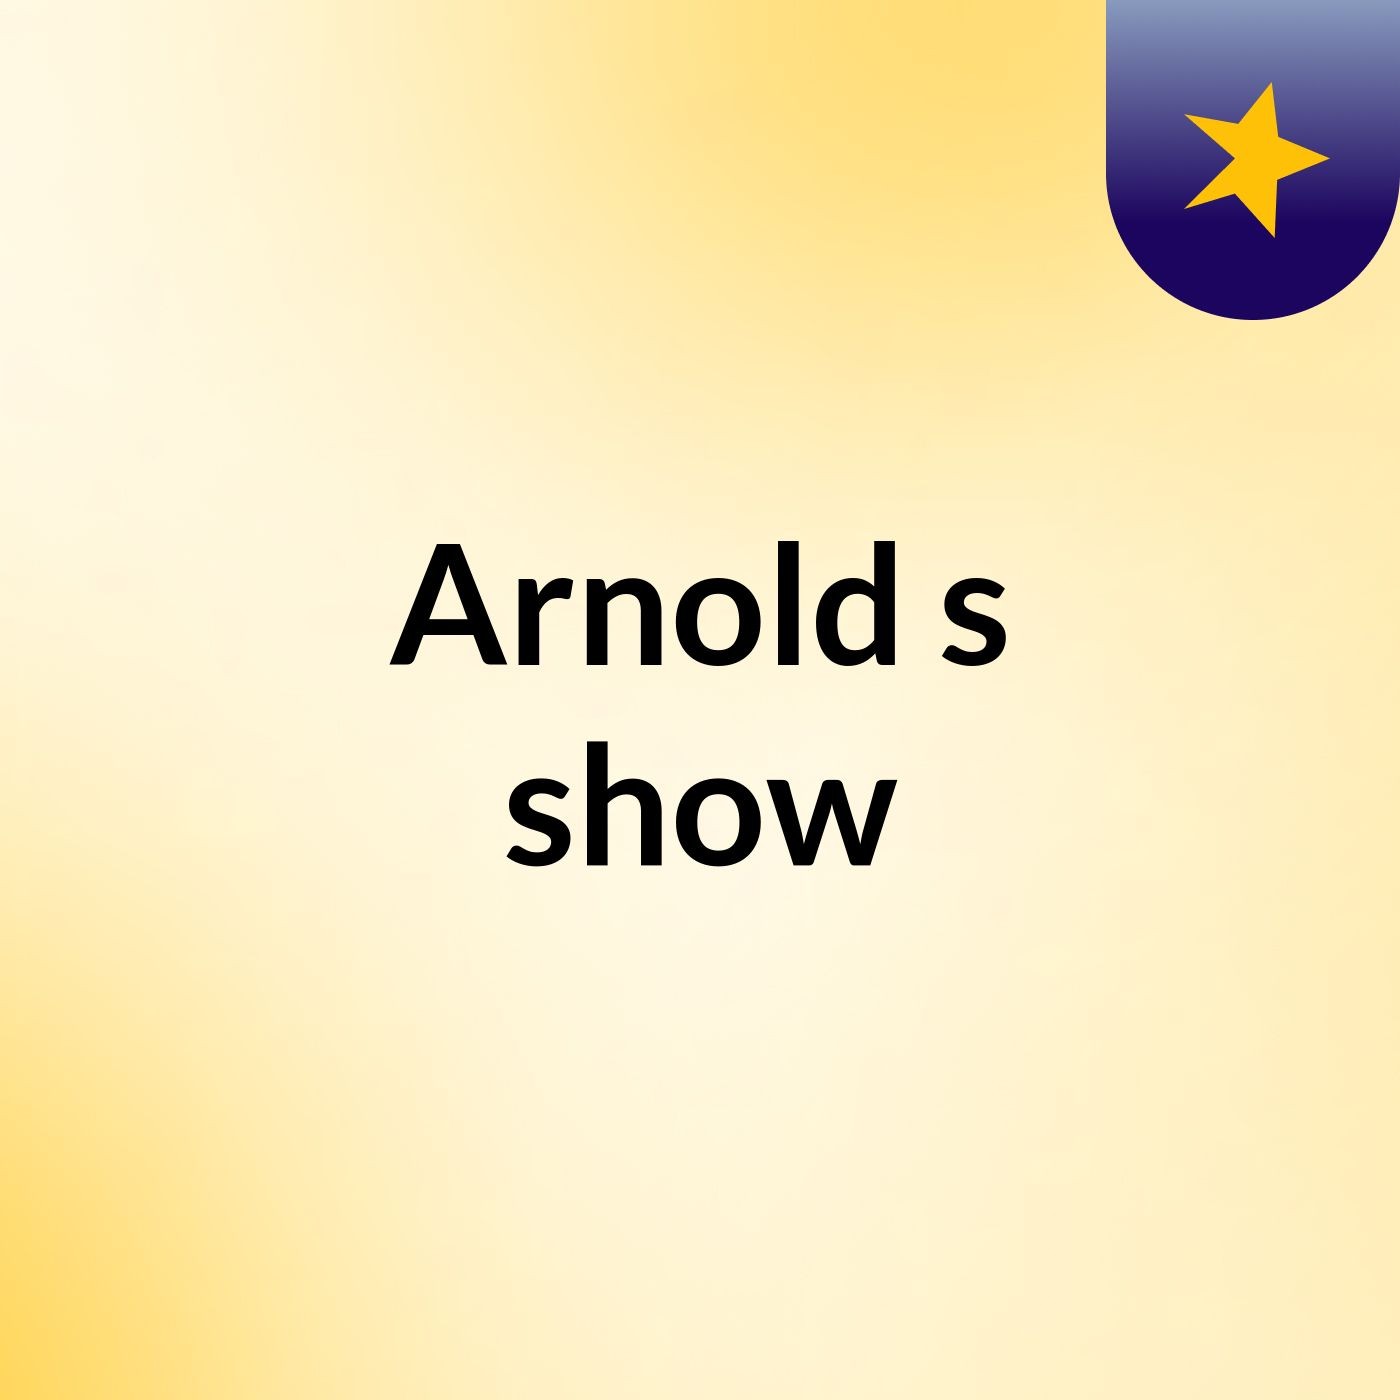 Arnold's show